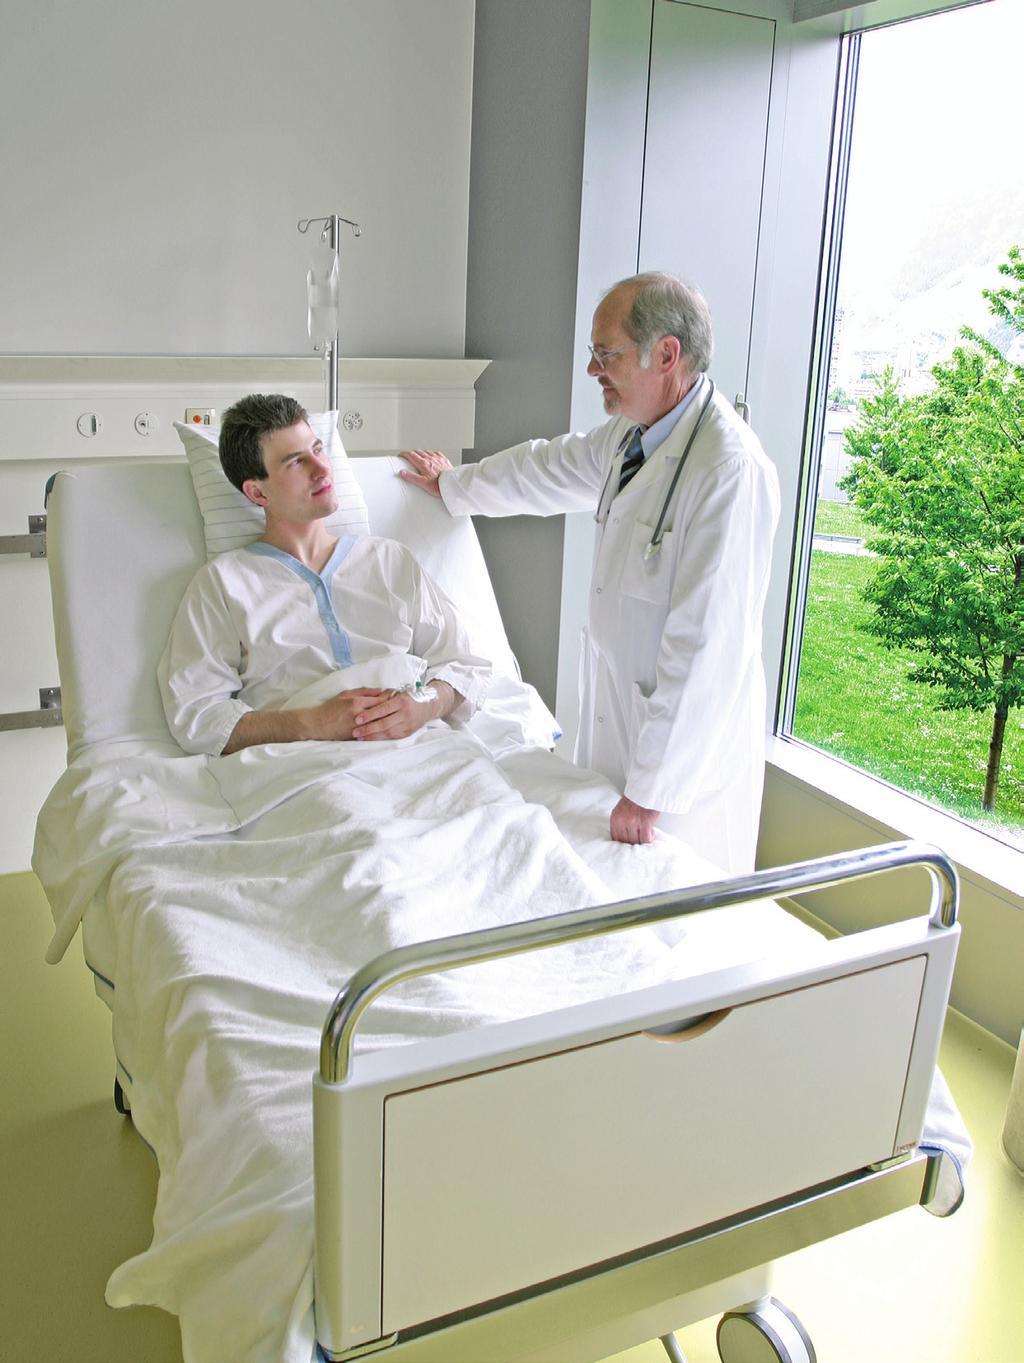 - Patients in the medical intensive care unit could be